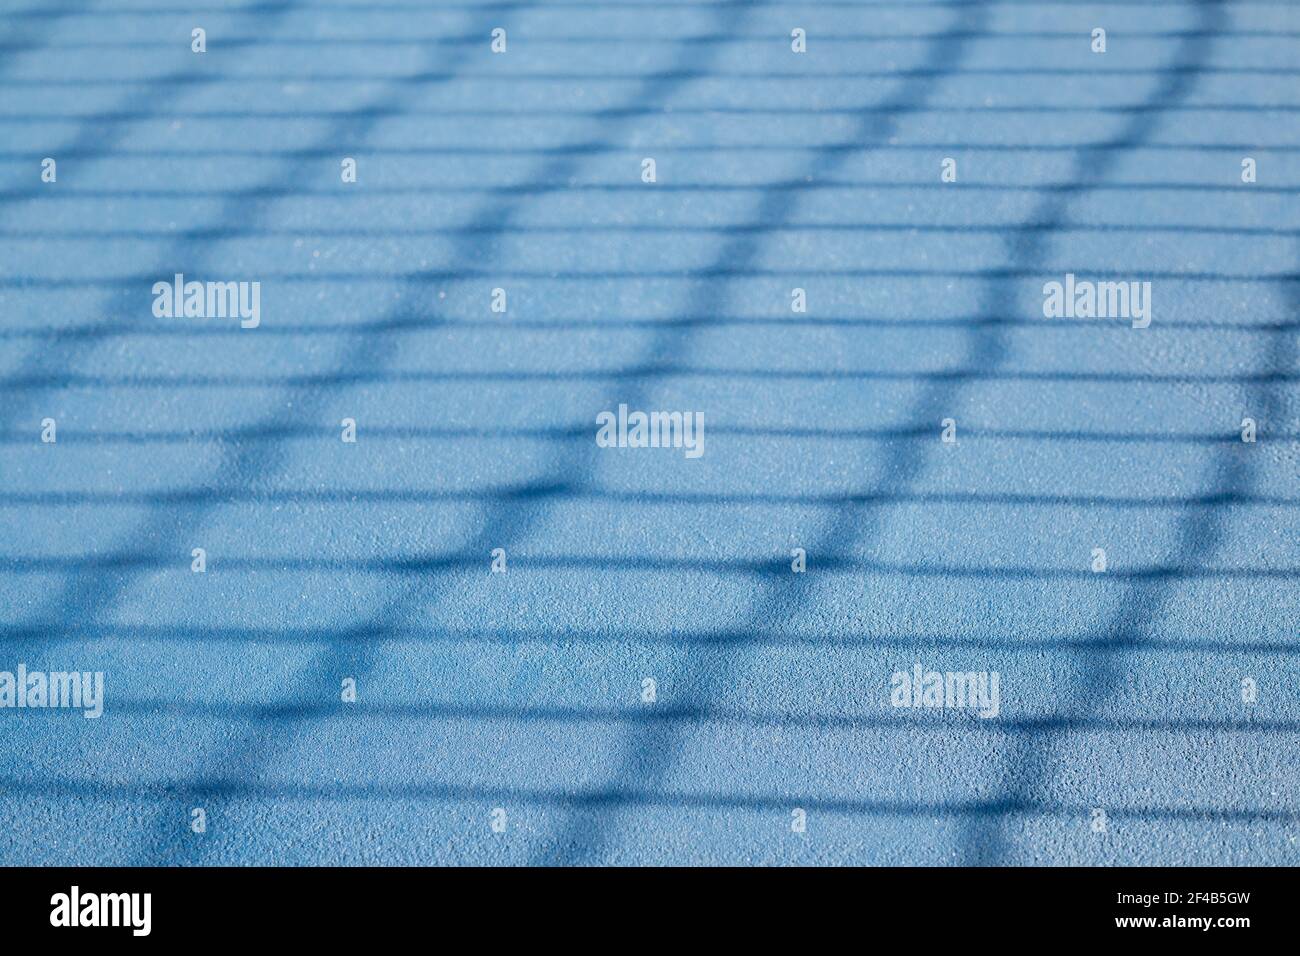 Abstract tennis court texture. Defocused tennis net shadow on ground, outside early morning. Blue rubberized and granulated ground surface for shock a Stock Photo